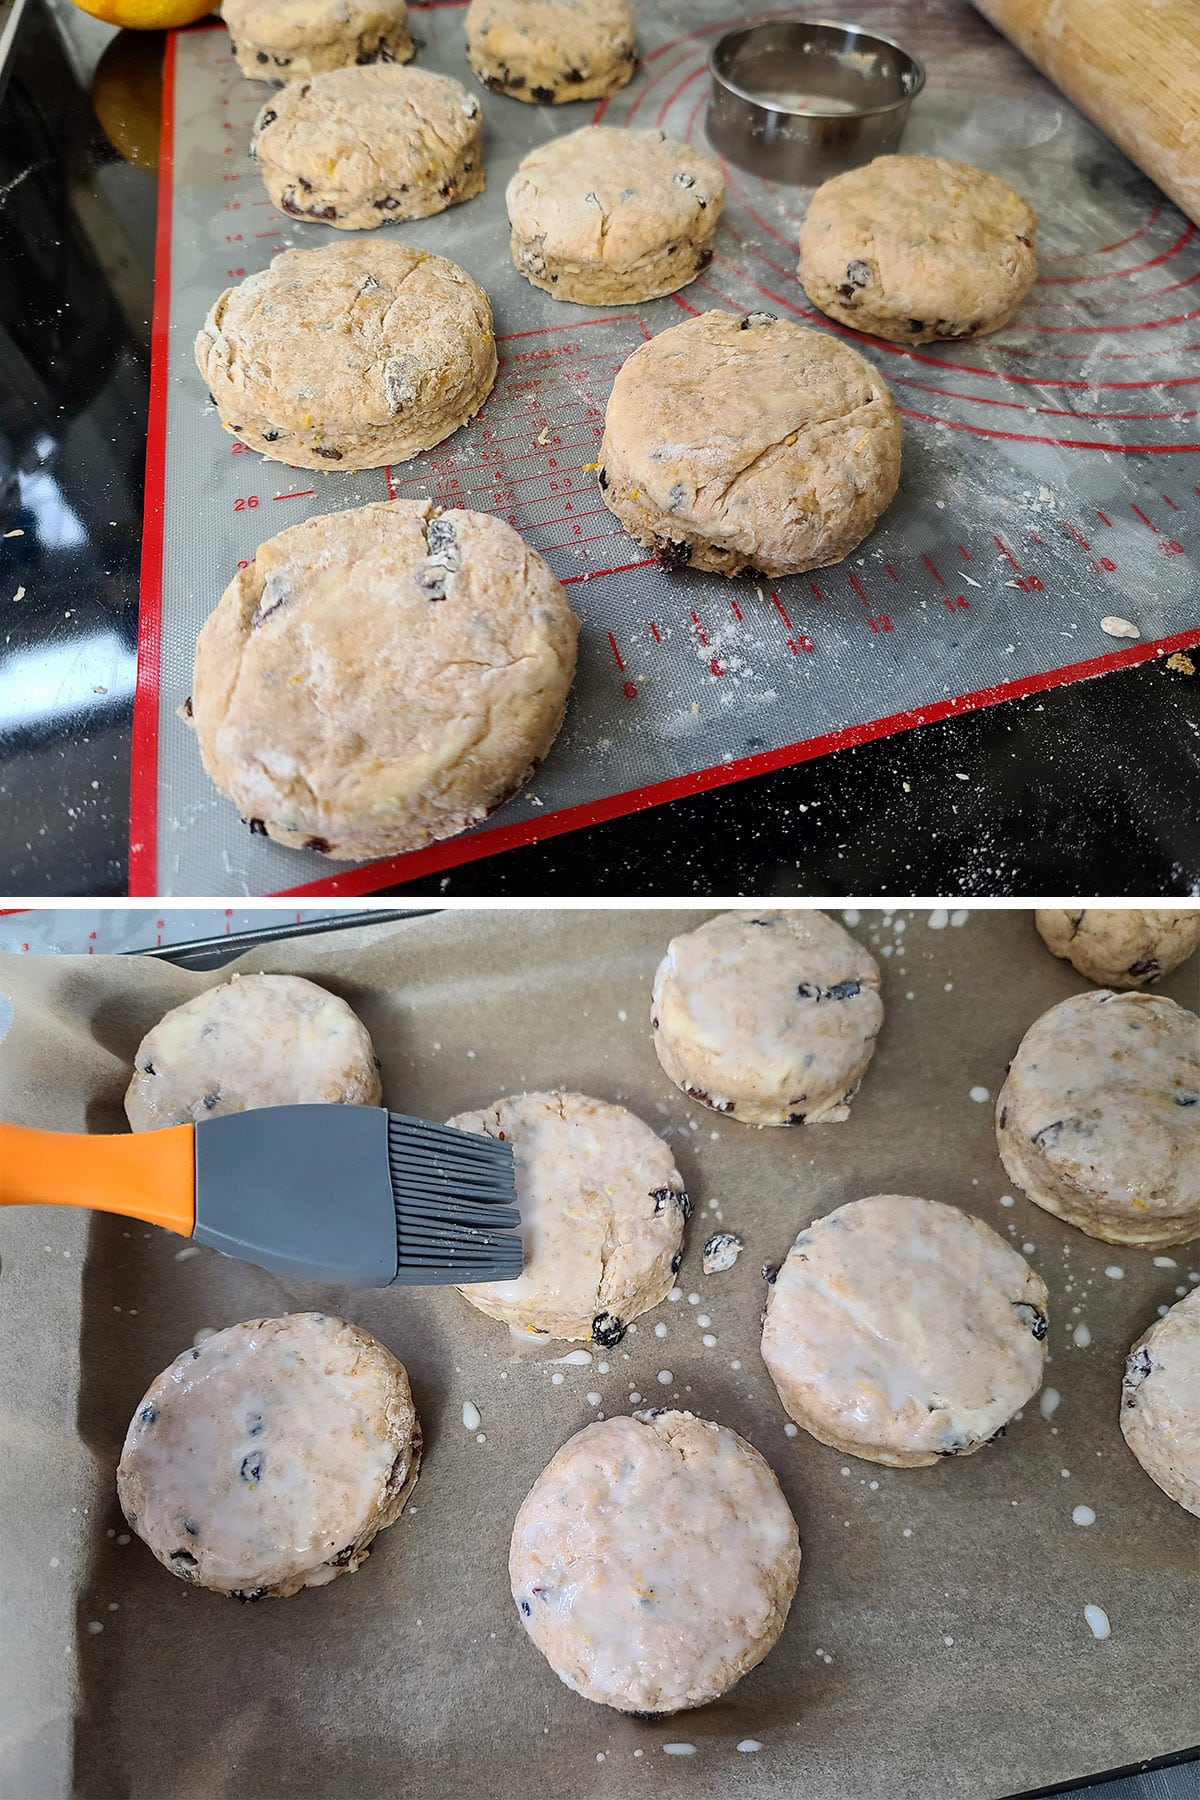 A 2 part image showing the cut scones being brushed with milk.